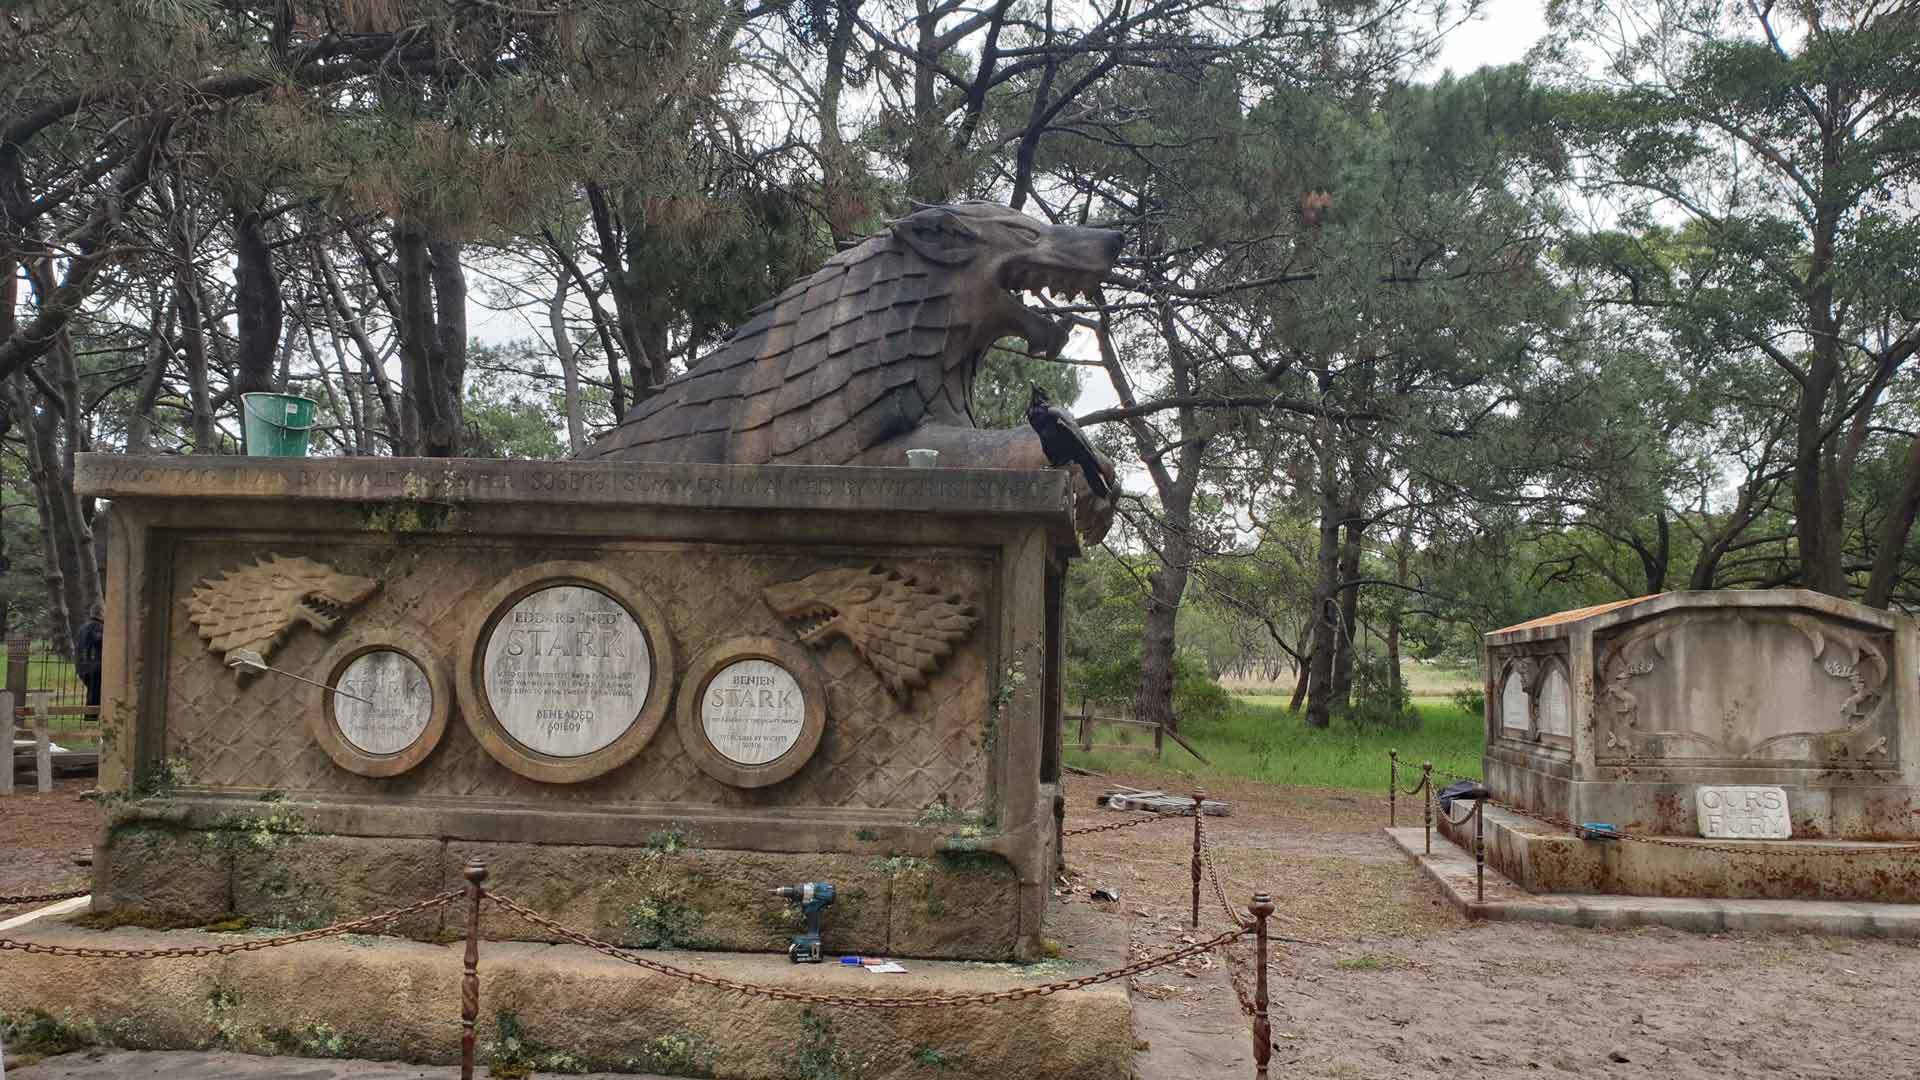 An Ominous 'Game of Thrones' Graveyard Has Popped Up in Centennial Park